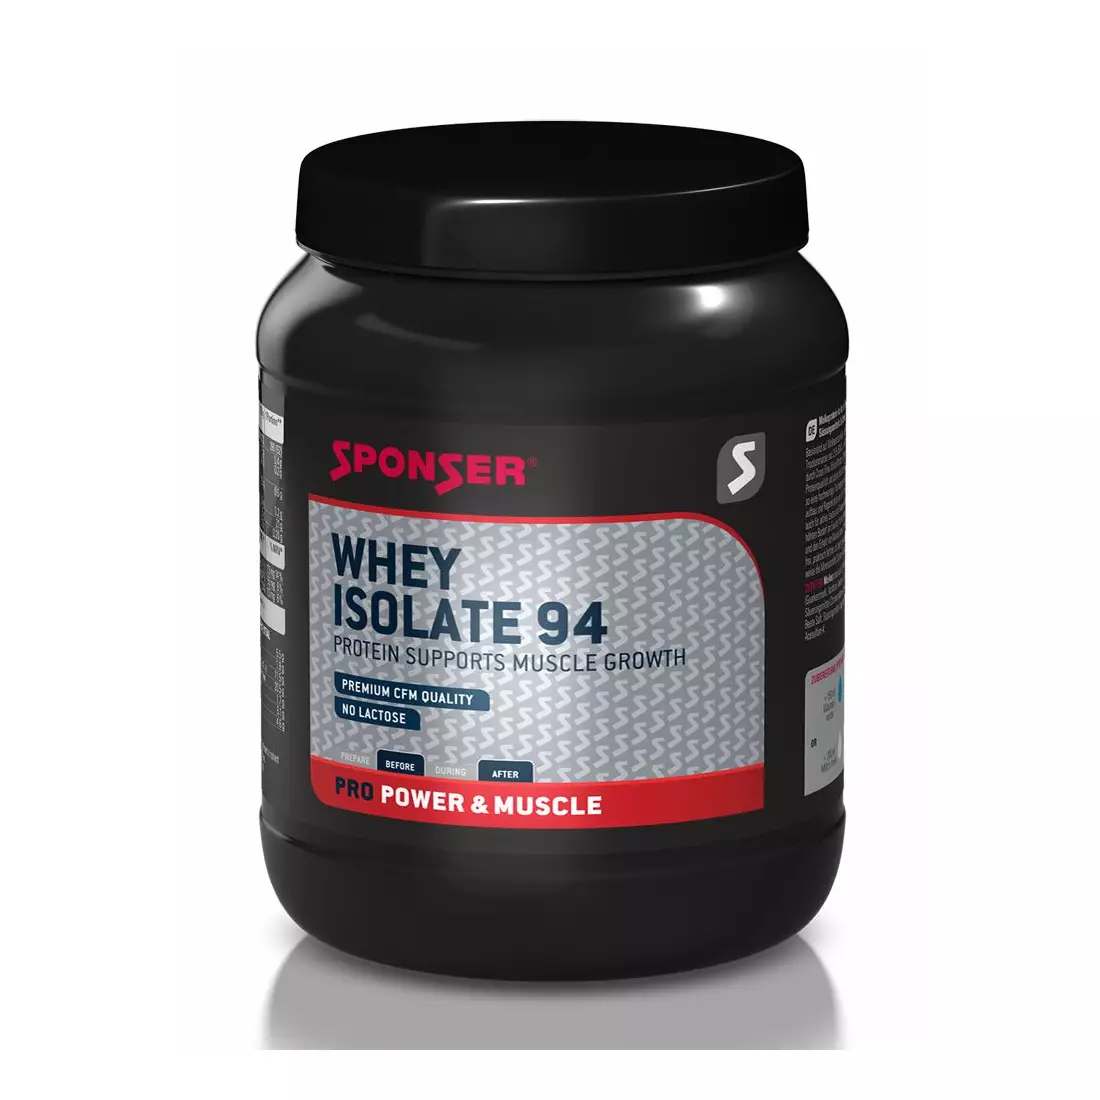 Conditioner SPONSER WHEY ISOLATE 94 Strawberry can 1500g